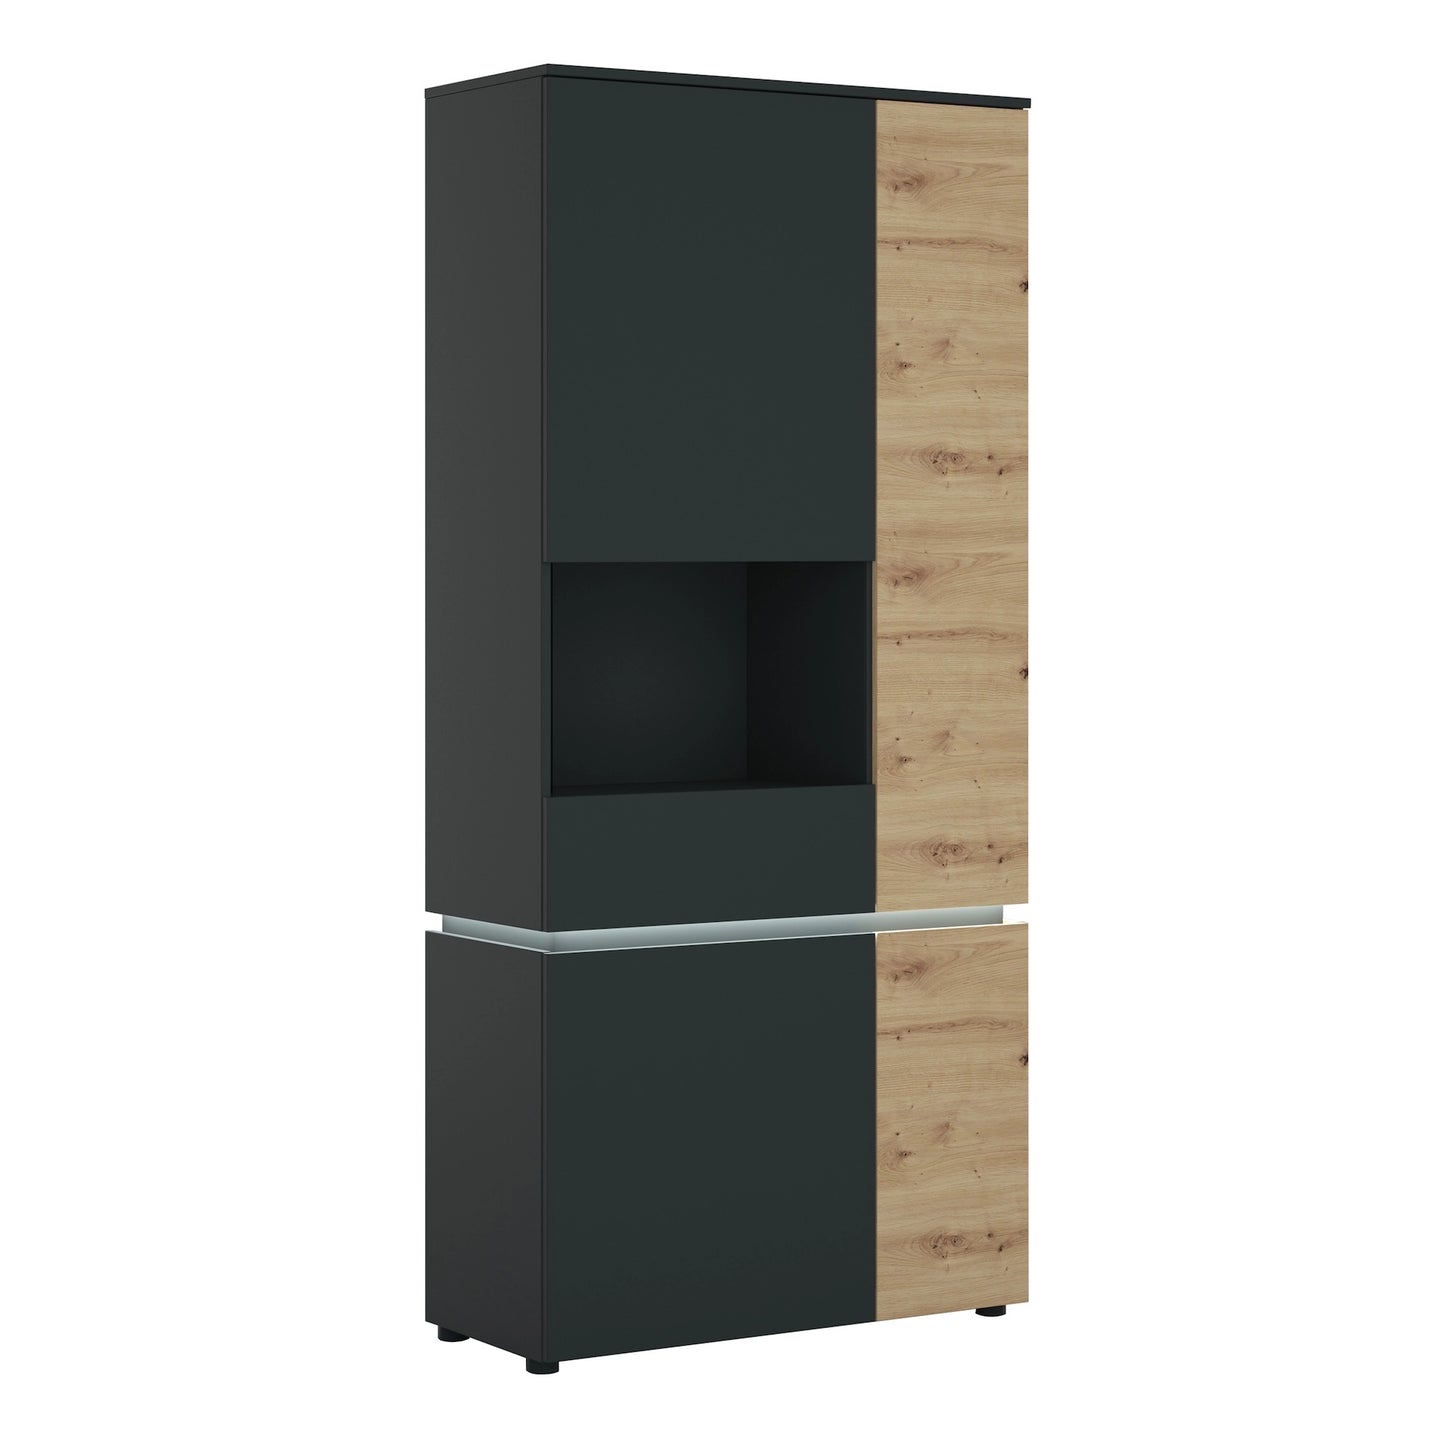 Furniture To Go Luci 4 Door Tall Display Cabinet LH (Including Led Lighting) in Platinum & Oak